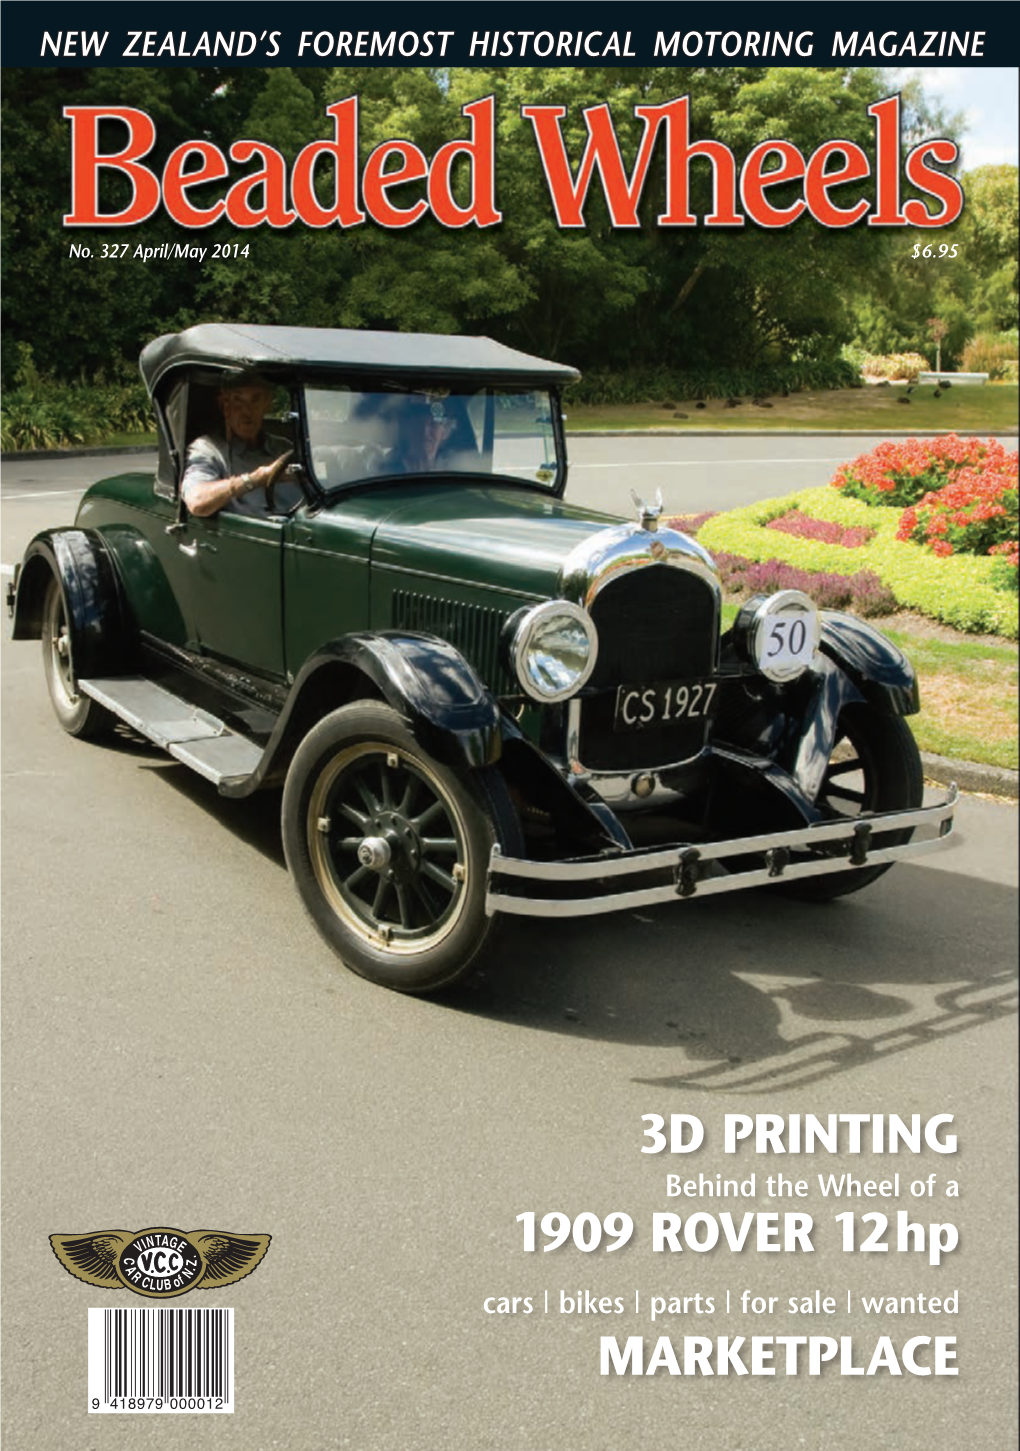 3D Printing 1909 Rover 12 Hp Marketplace